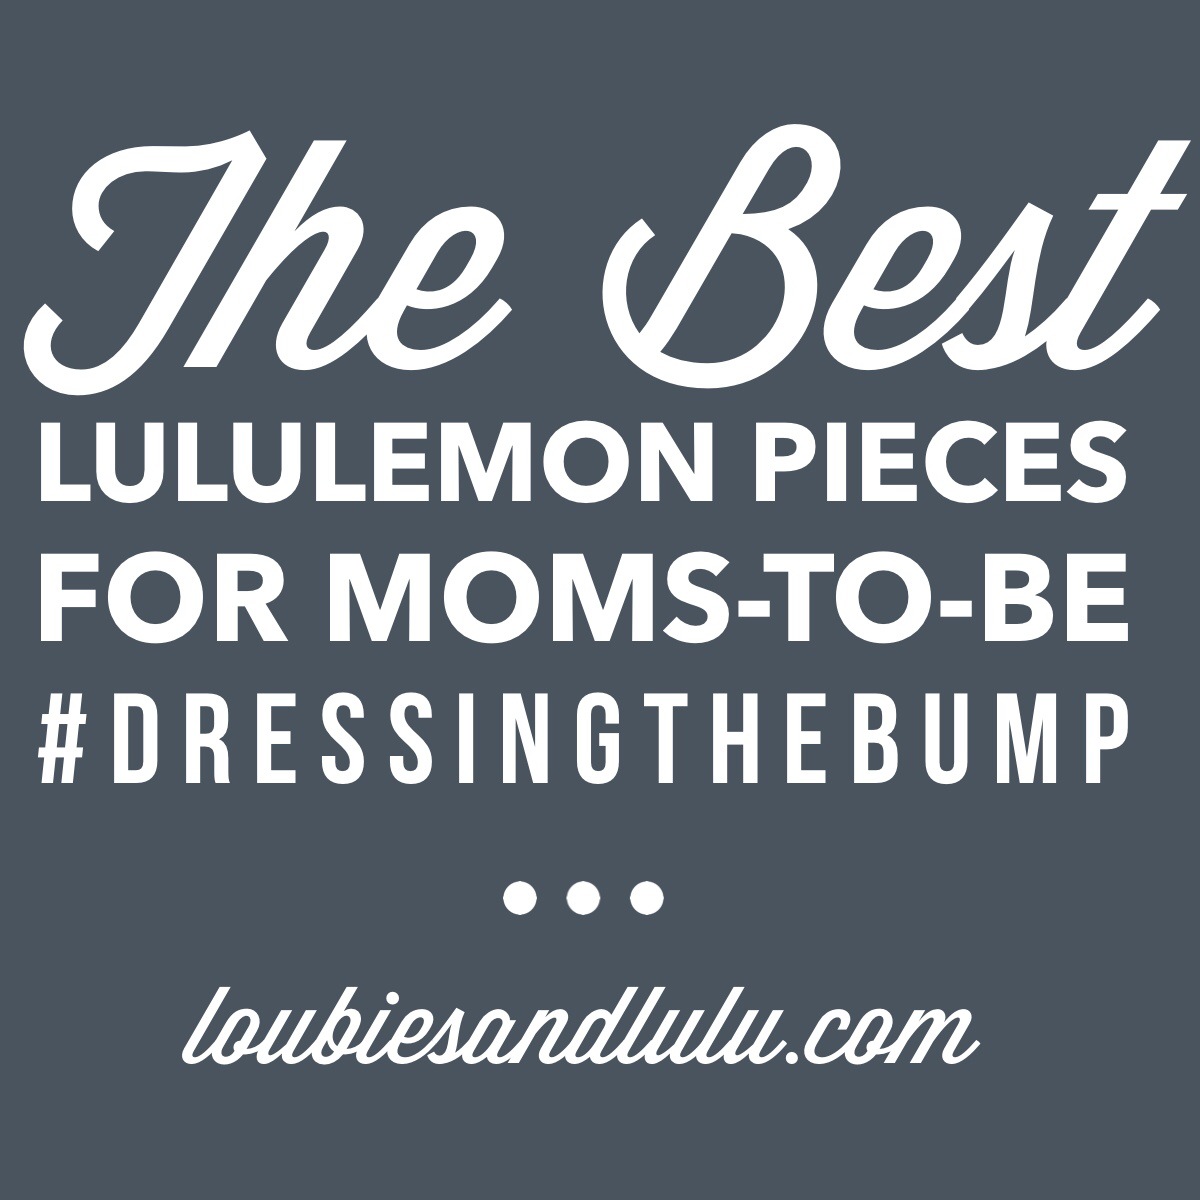 Best Lululemon Pieces for Pregnancy - can you wear Lululemon while